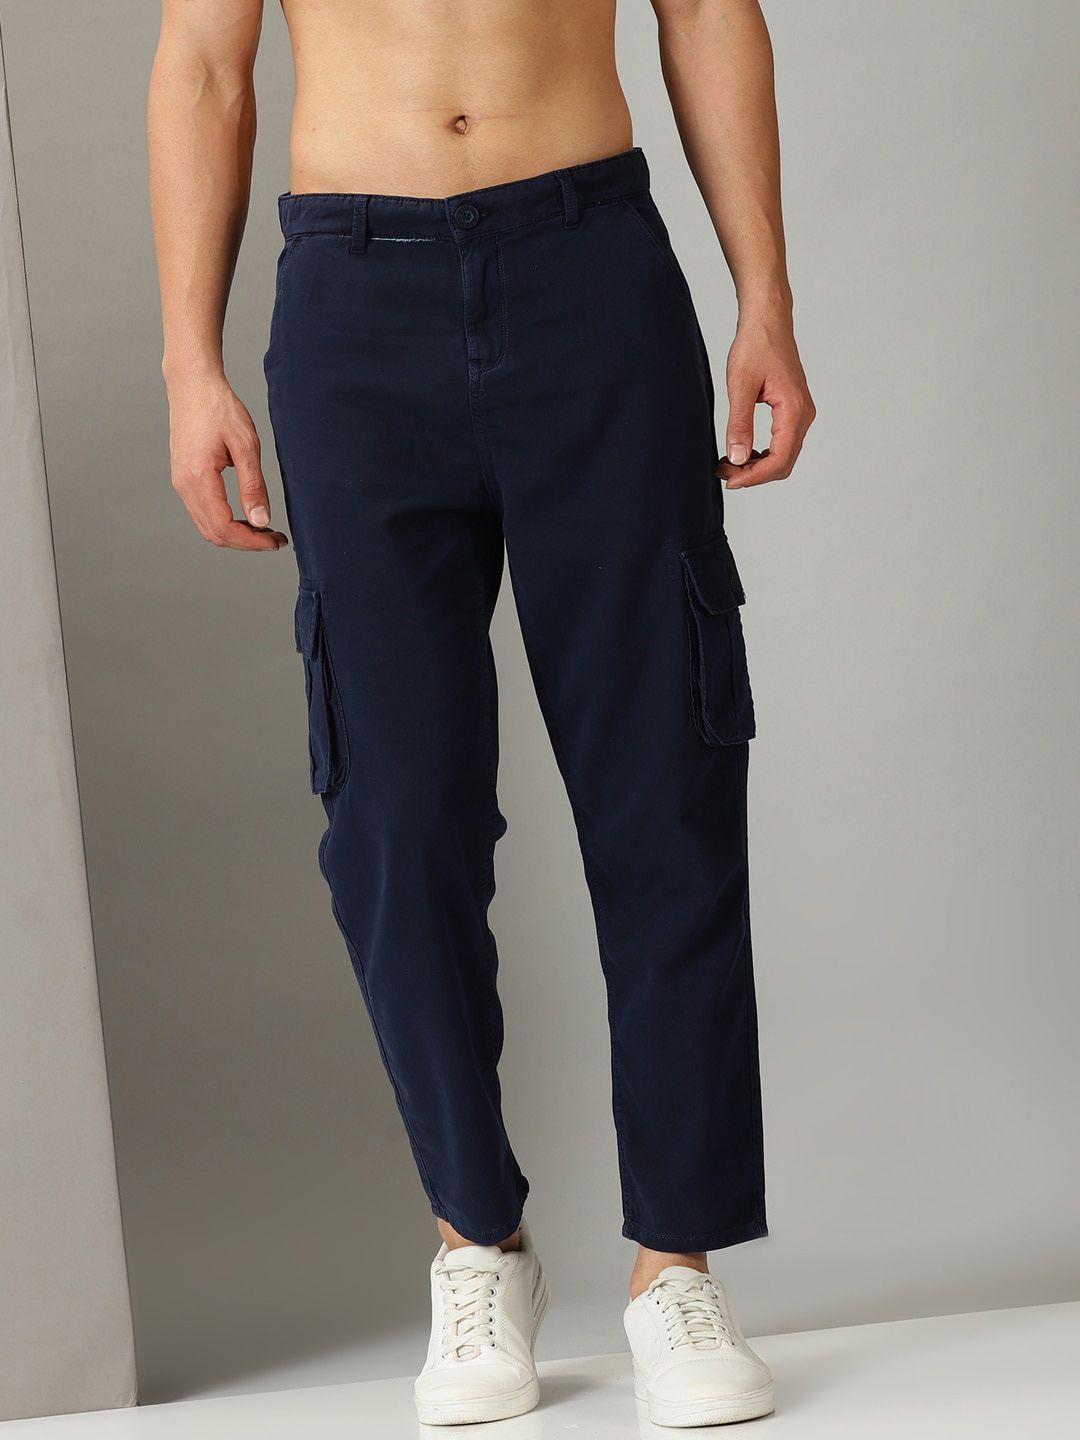 old-grey-men-cotton-relaxed-loose-fit-mid-rise-cargos-trousers